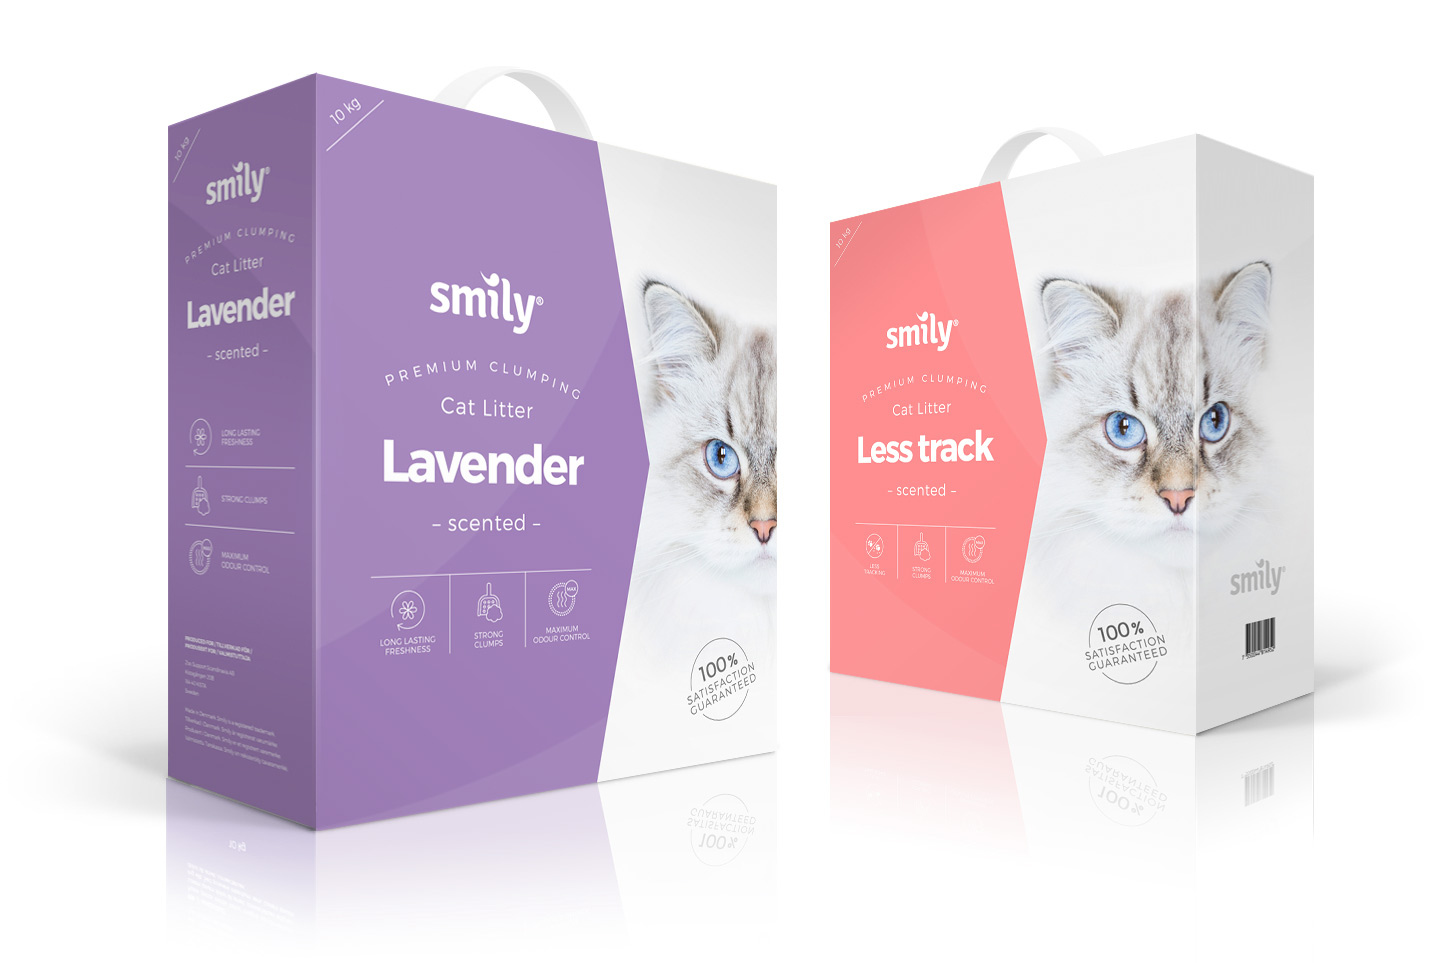 Smily CatLitter collection package design